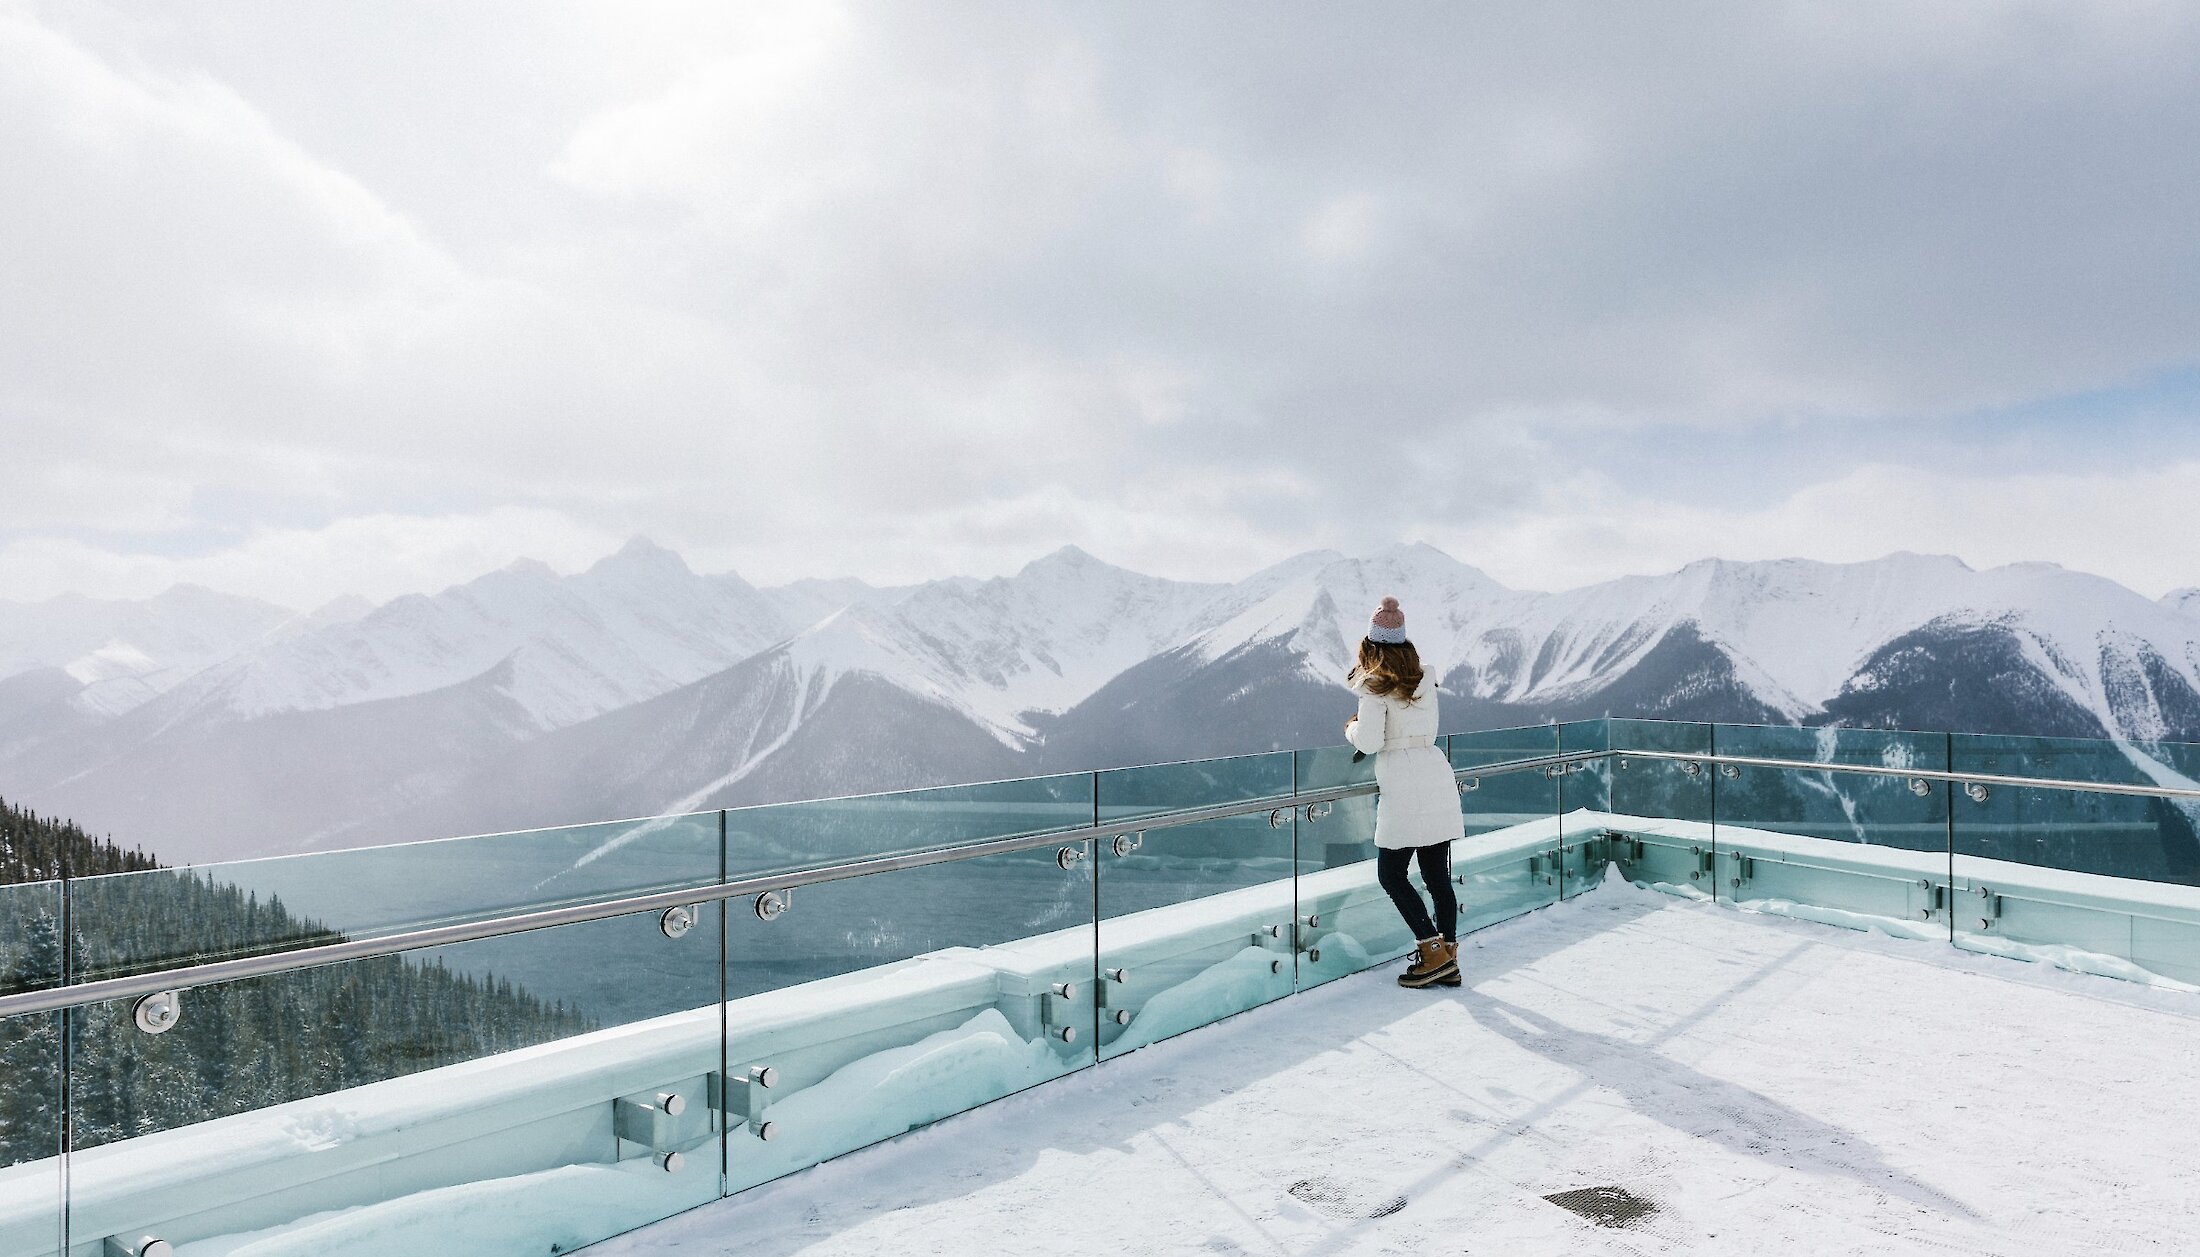 A lady on the viewing deck of the Banff Gondola in Winter taking in the mountain views